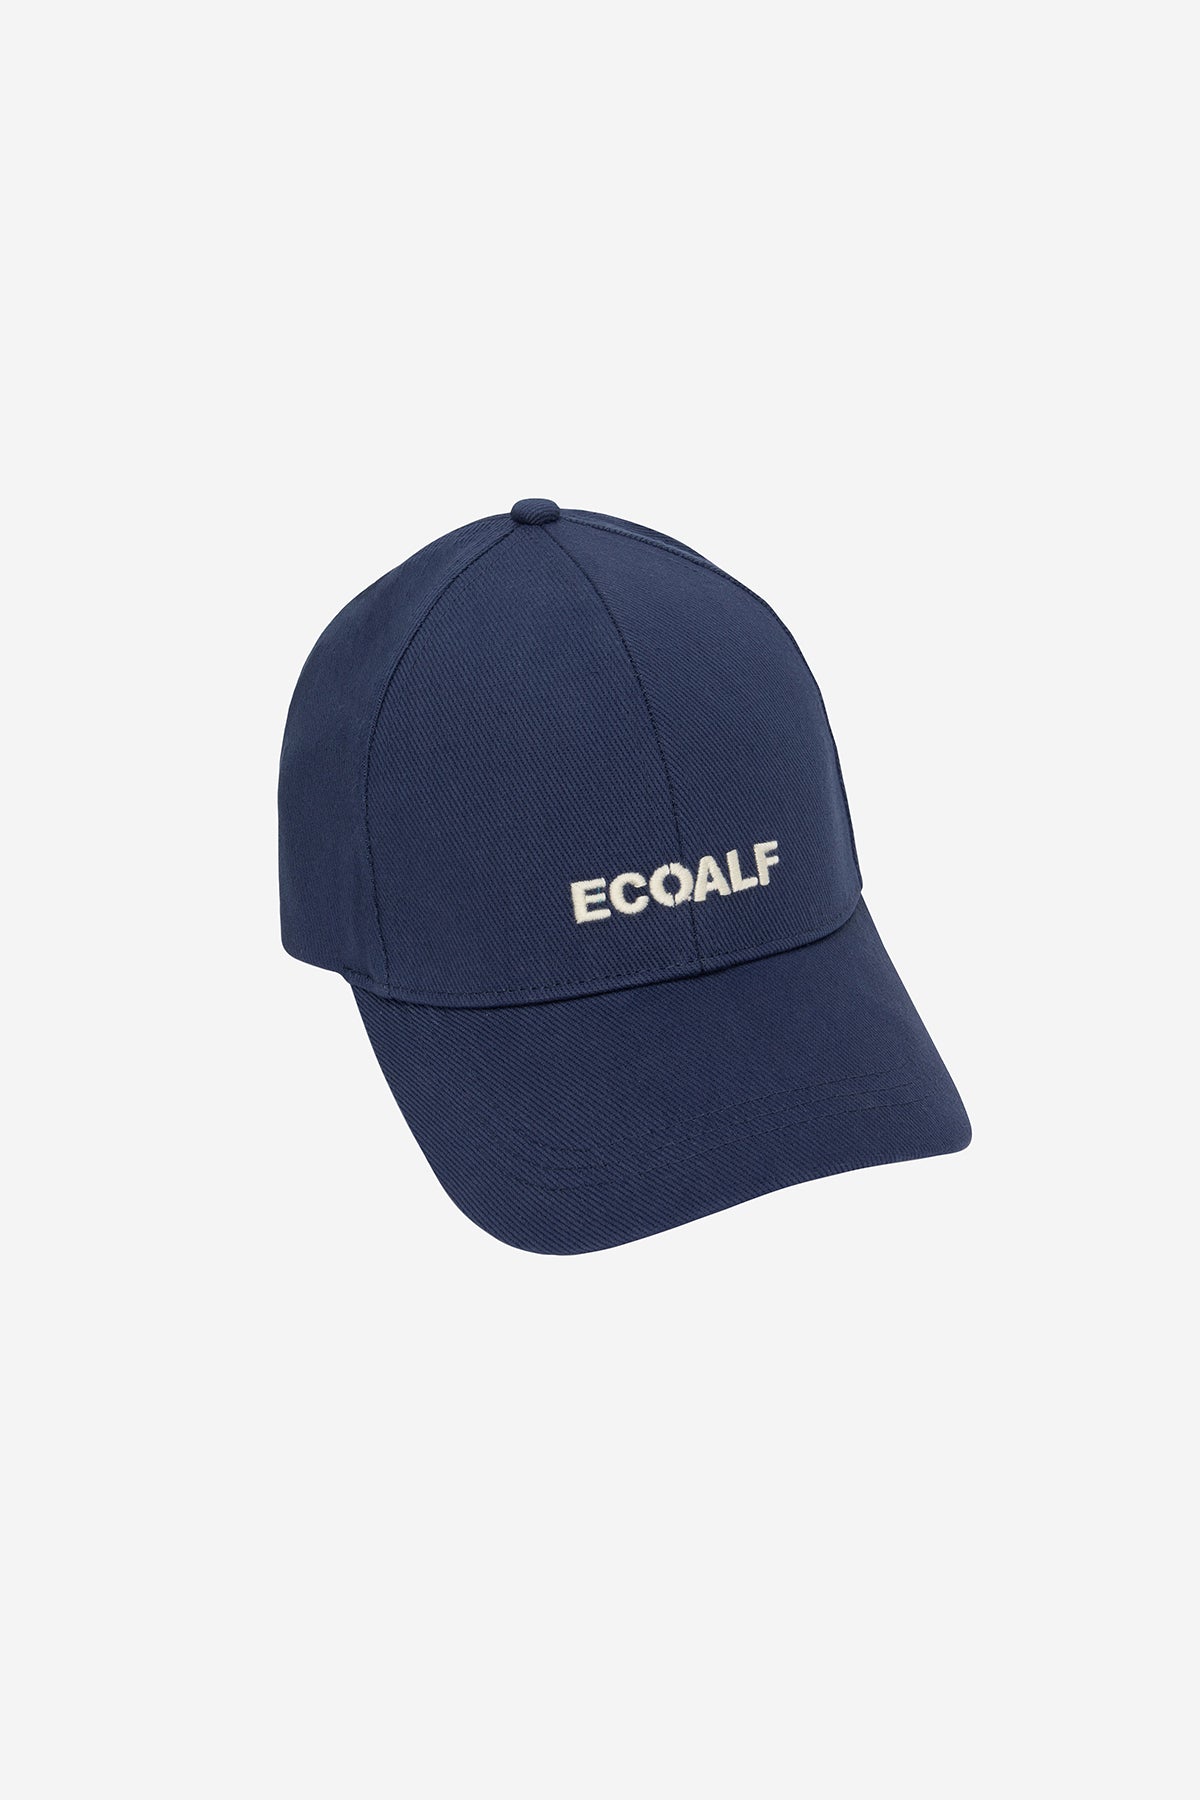 BLUE EMBROIDERED CAP 